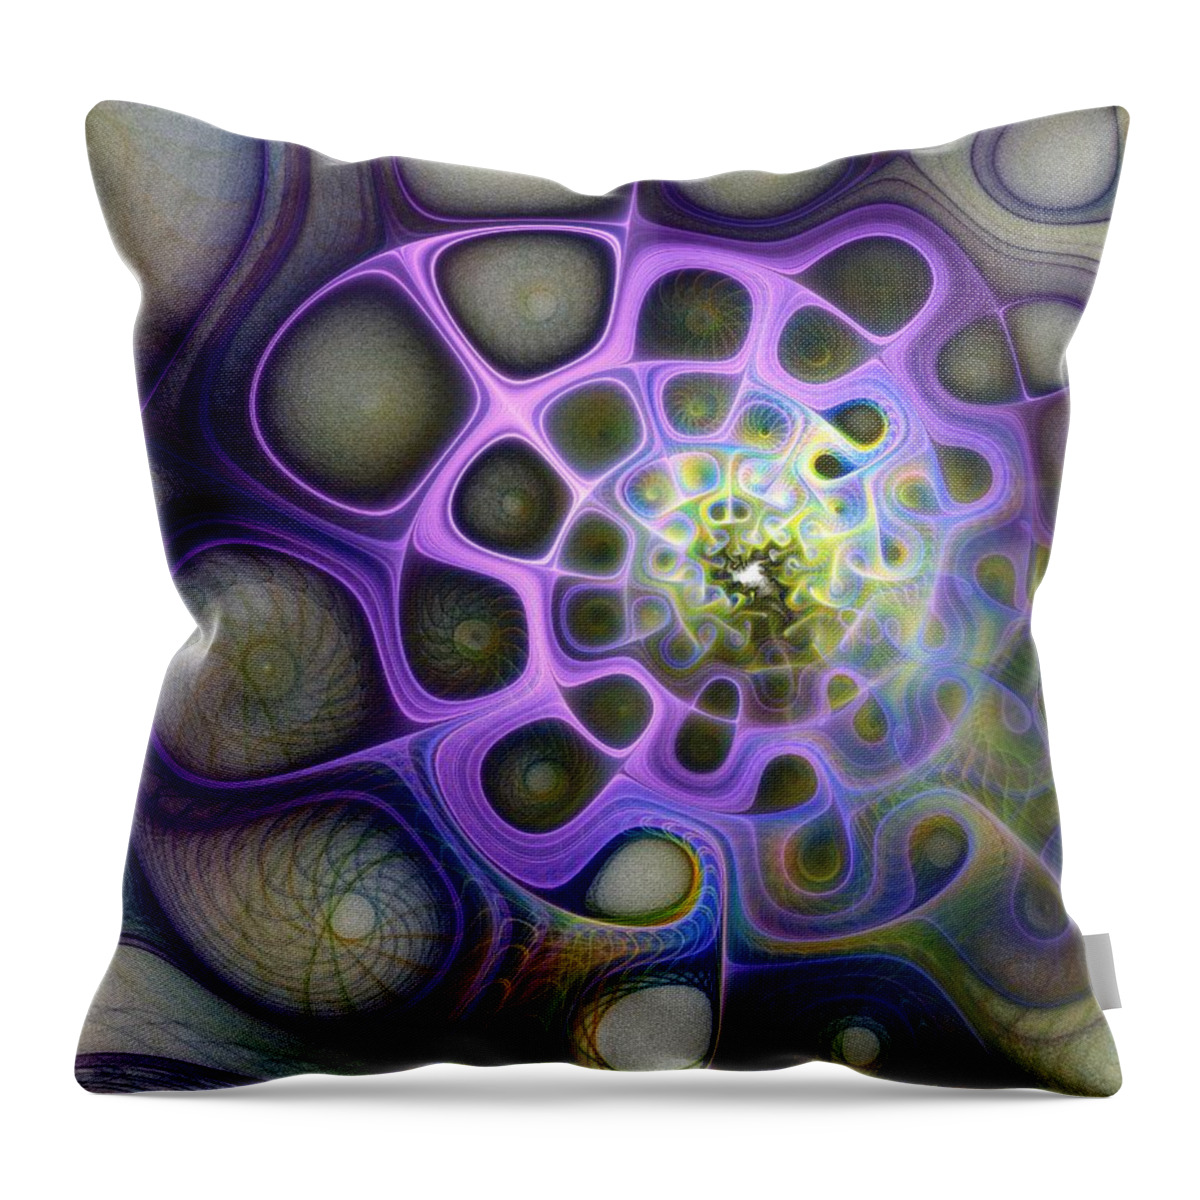 Digital Art Throw Pillow featuring the digital art Mindscapes by Amanda Moore